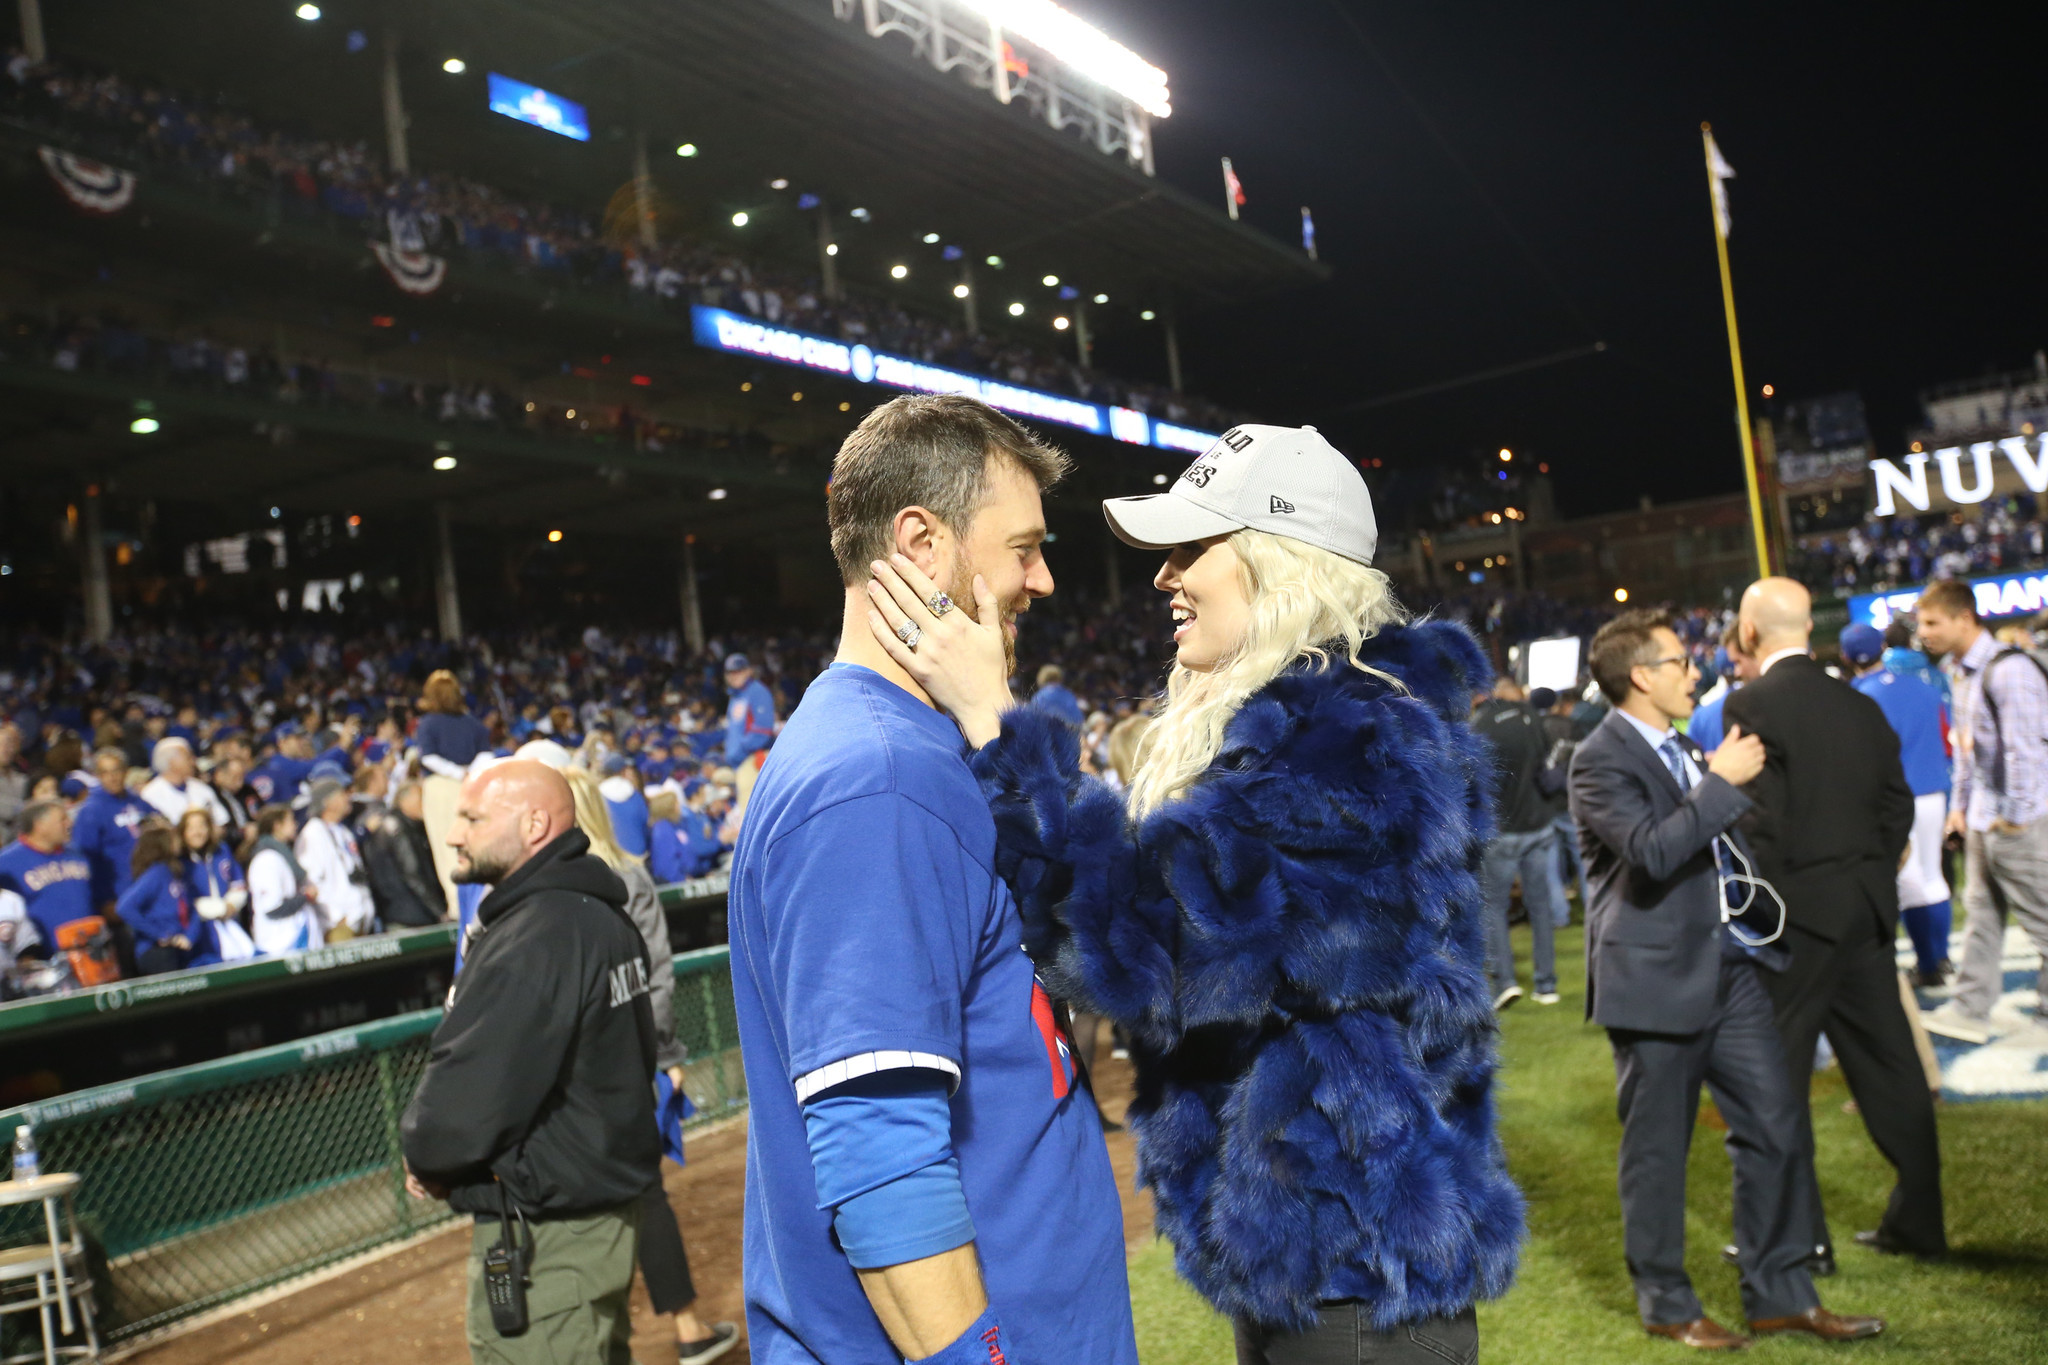 Ben Zobrist says Julianna 'coaxed' him back to Chicago Cubs